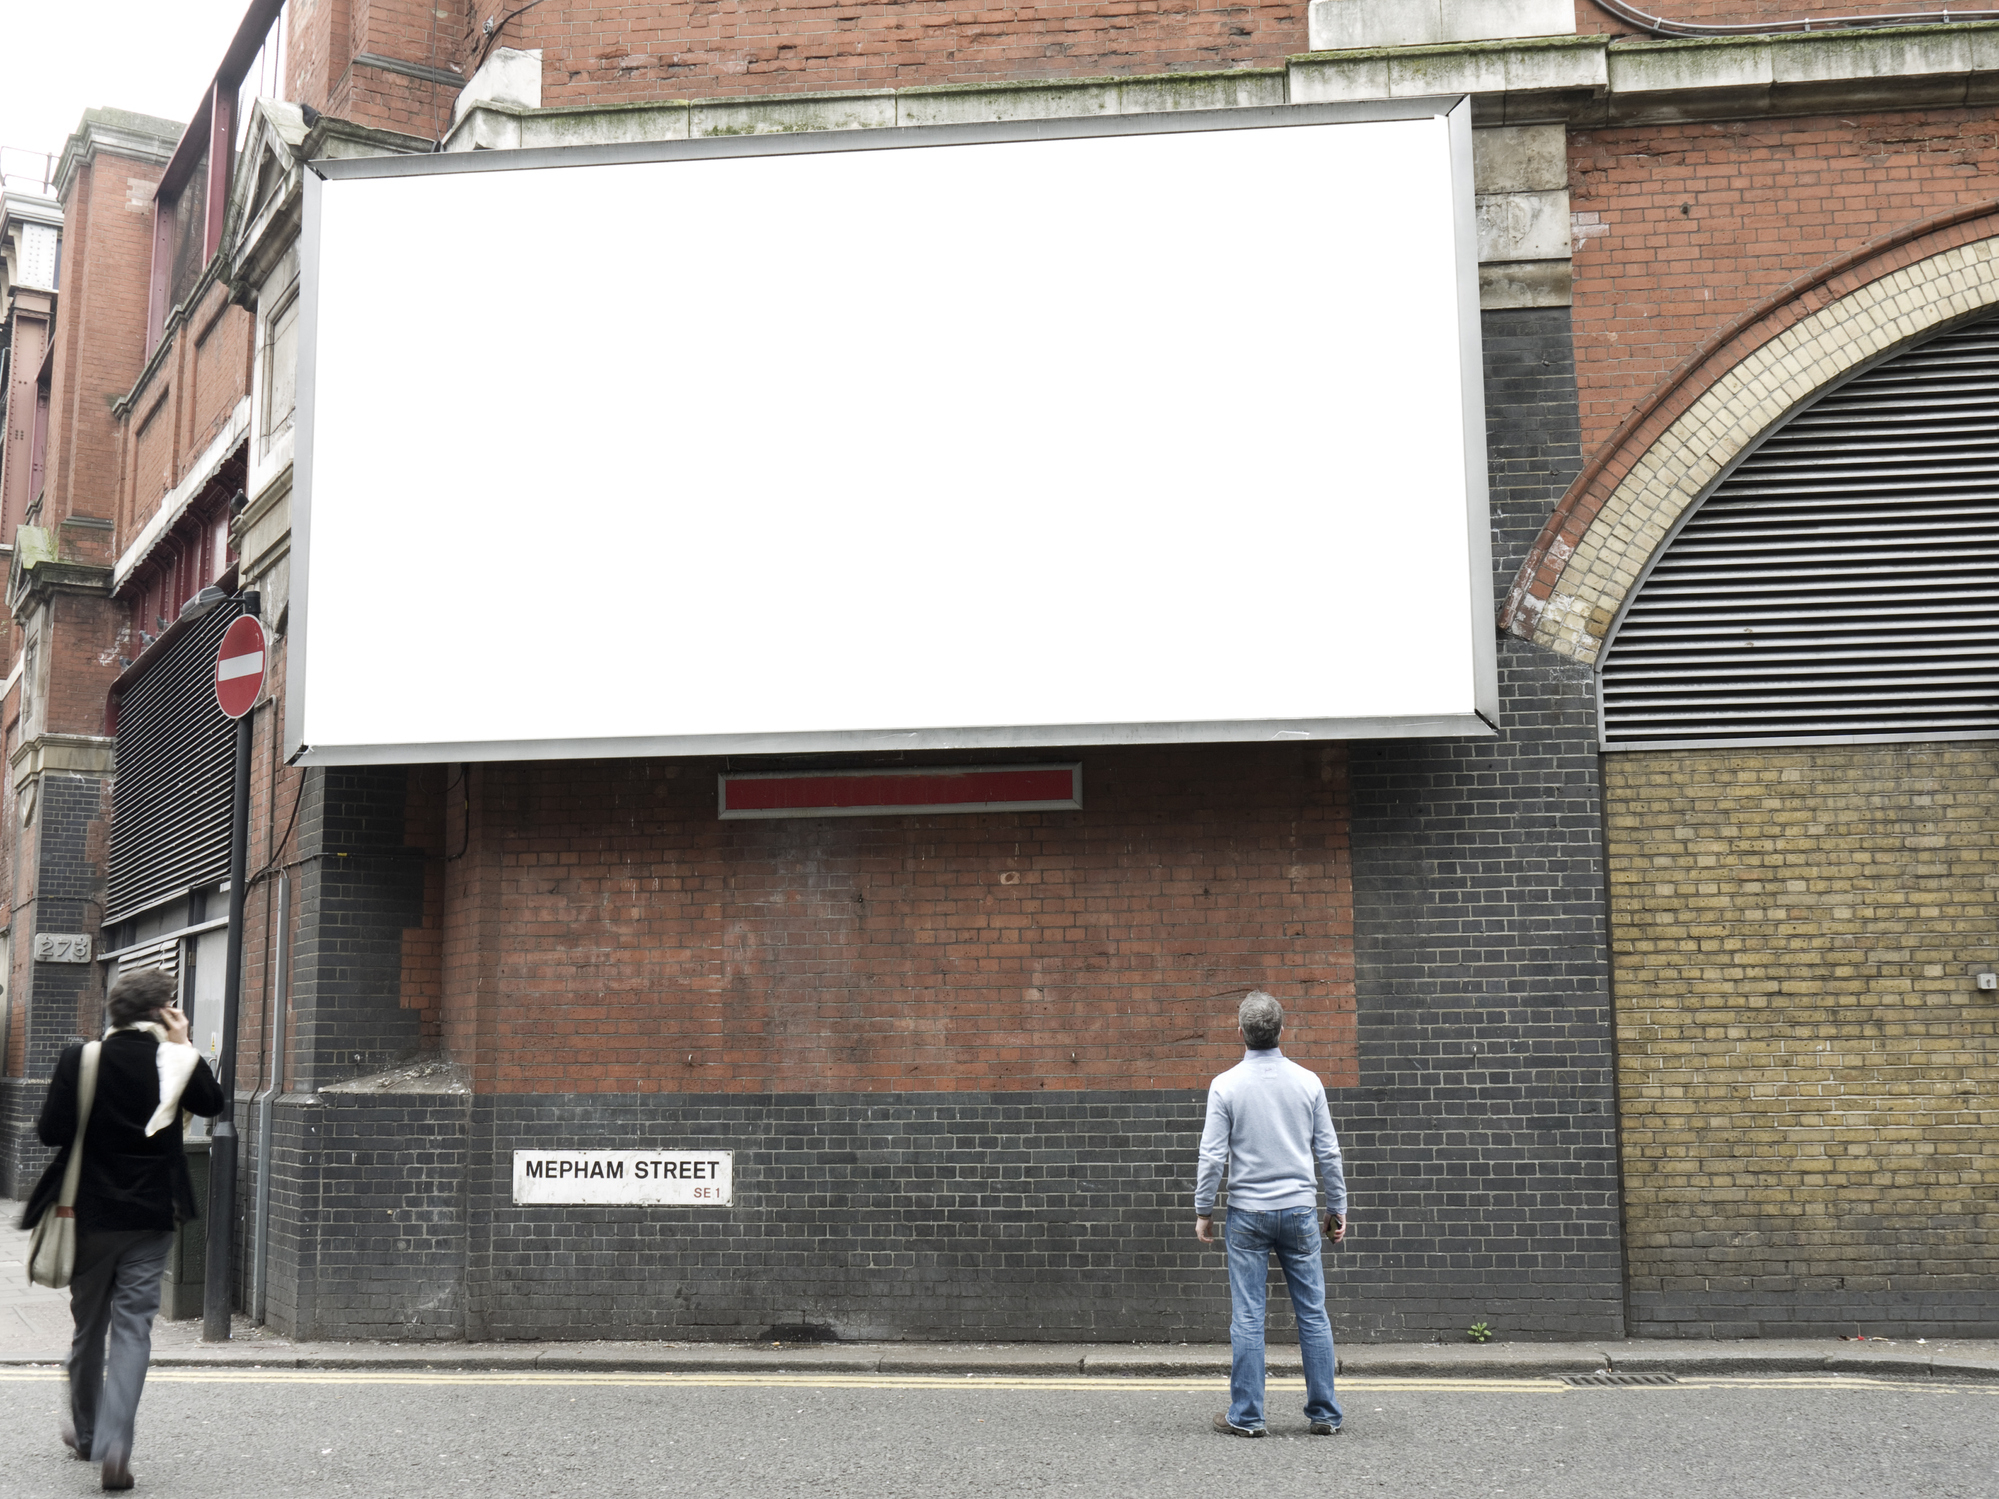 Man standing in front of a large blank billboard on a city street